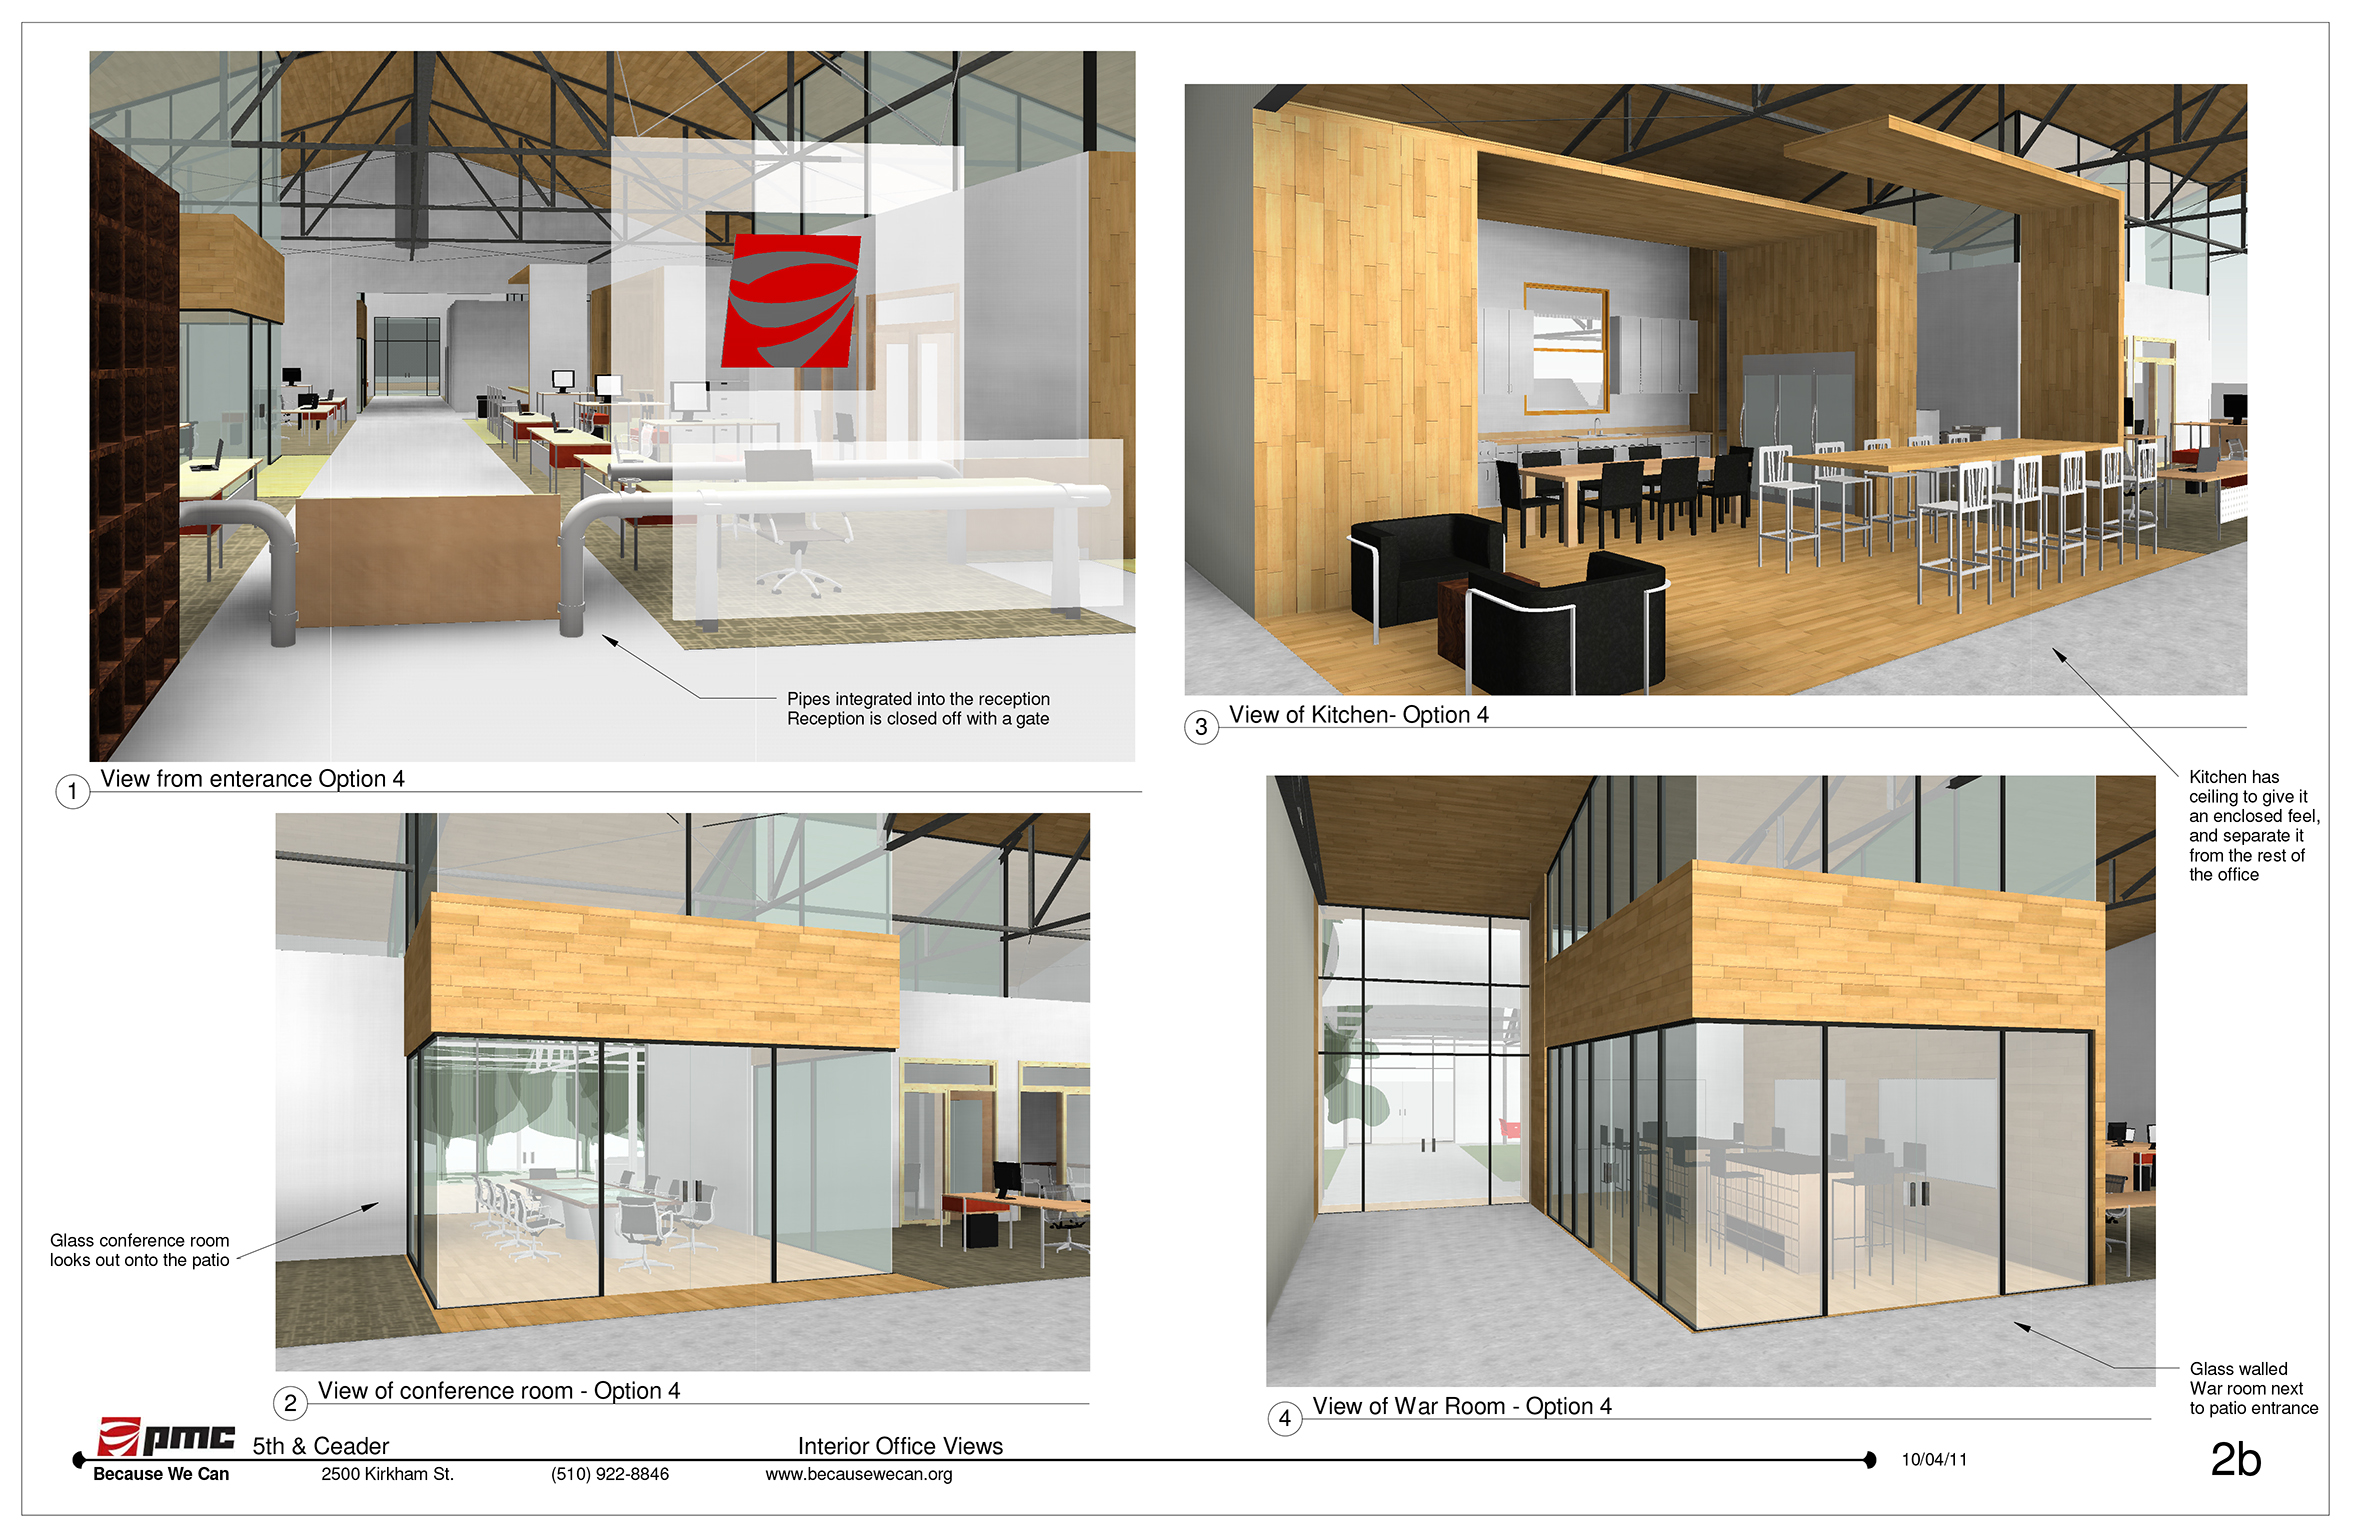  These interior office views show various collaborative work areas. A small, tight knit team operates this company. The need to have many kinds of meeting areas with and without clients is addressed in this layout. 